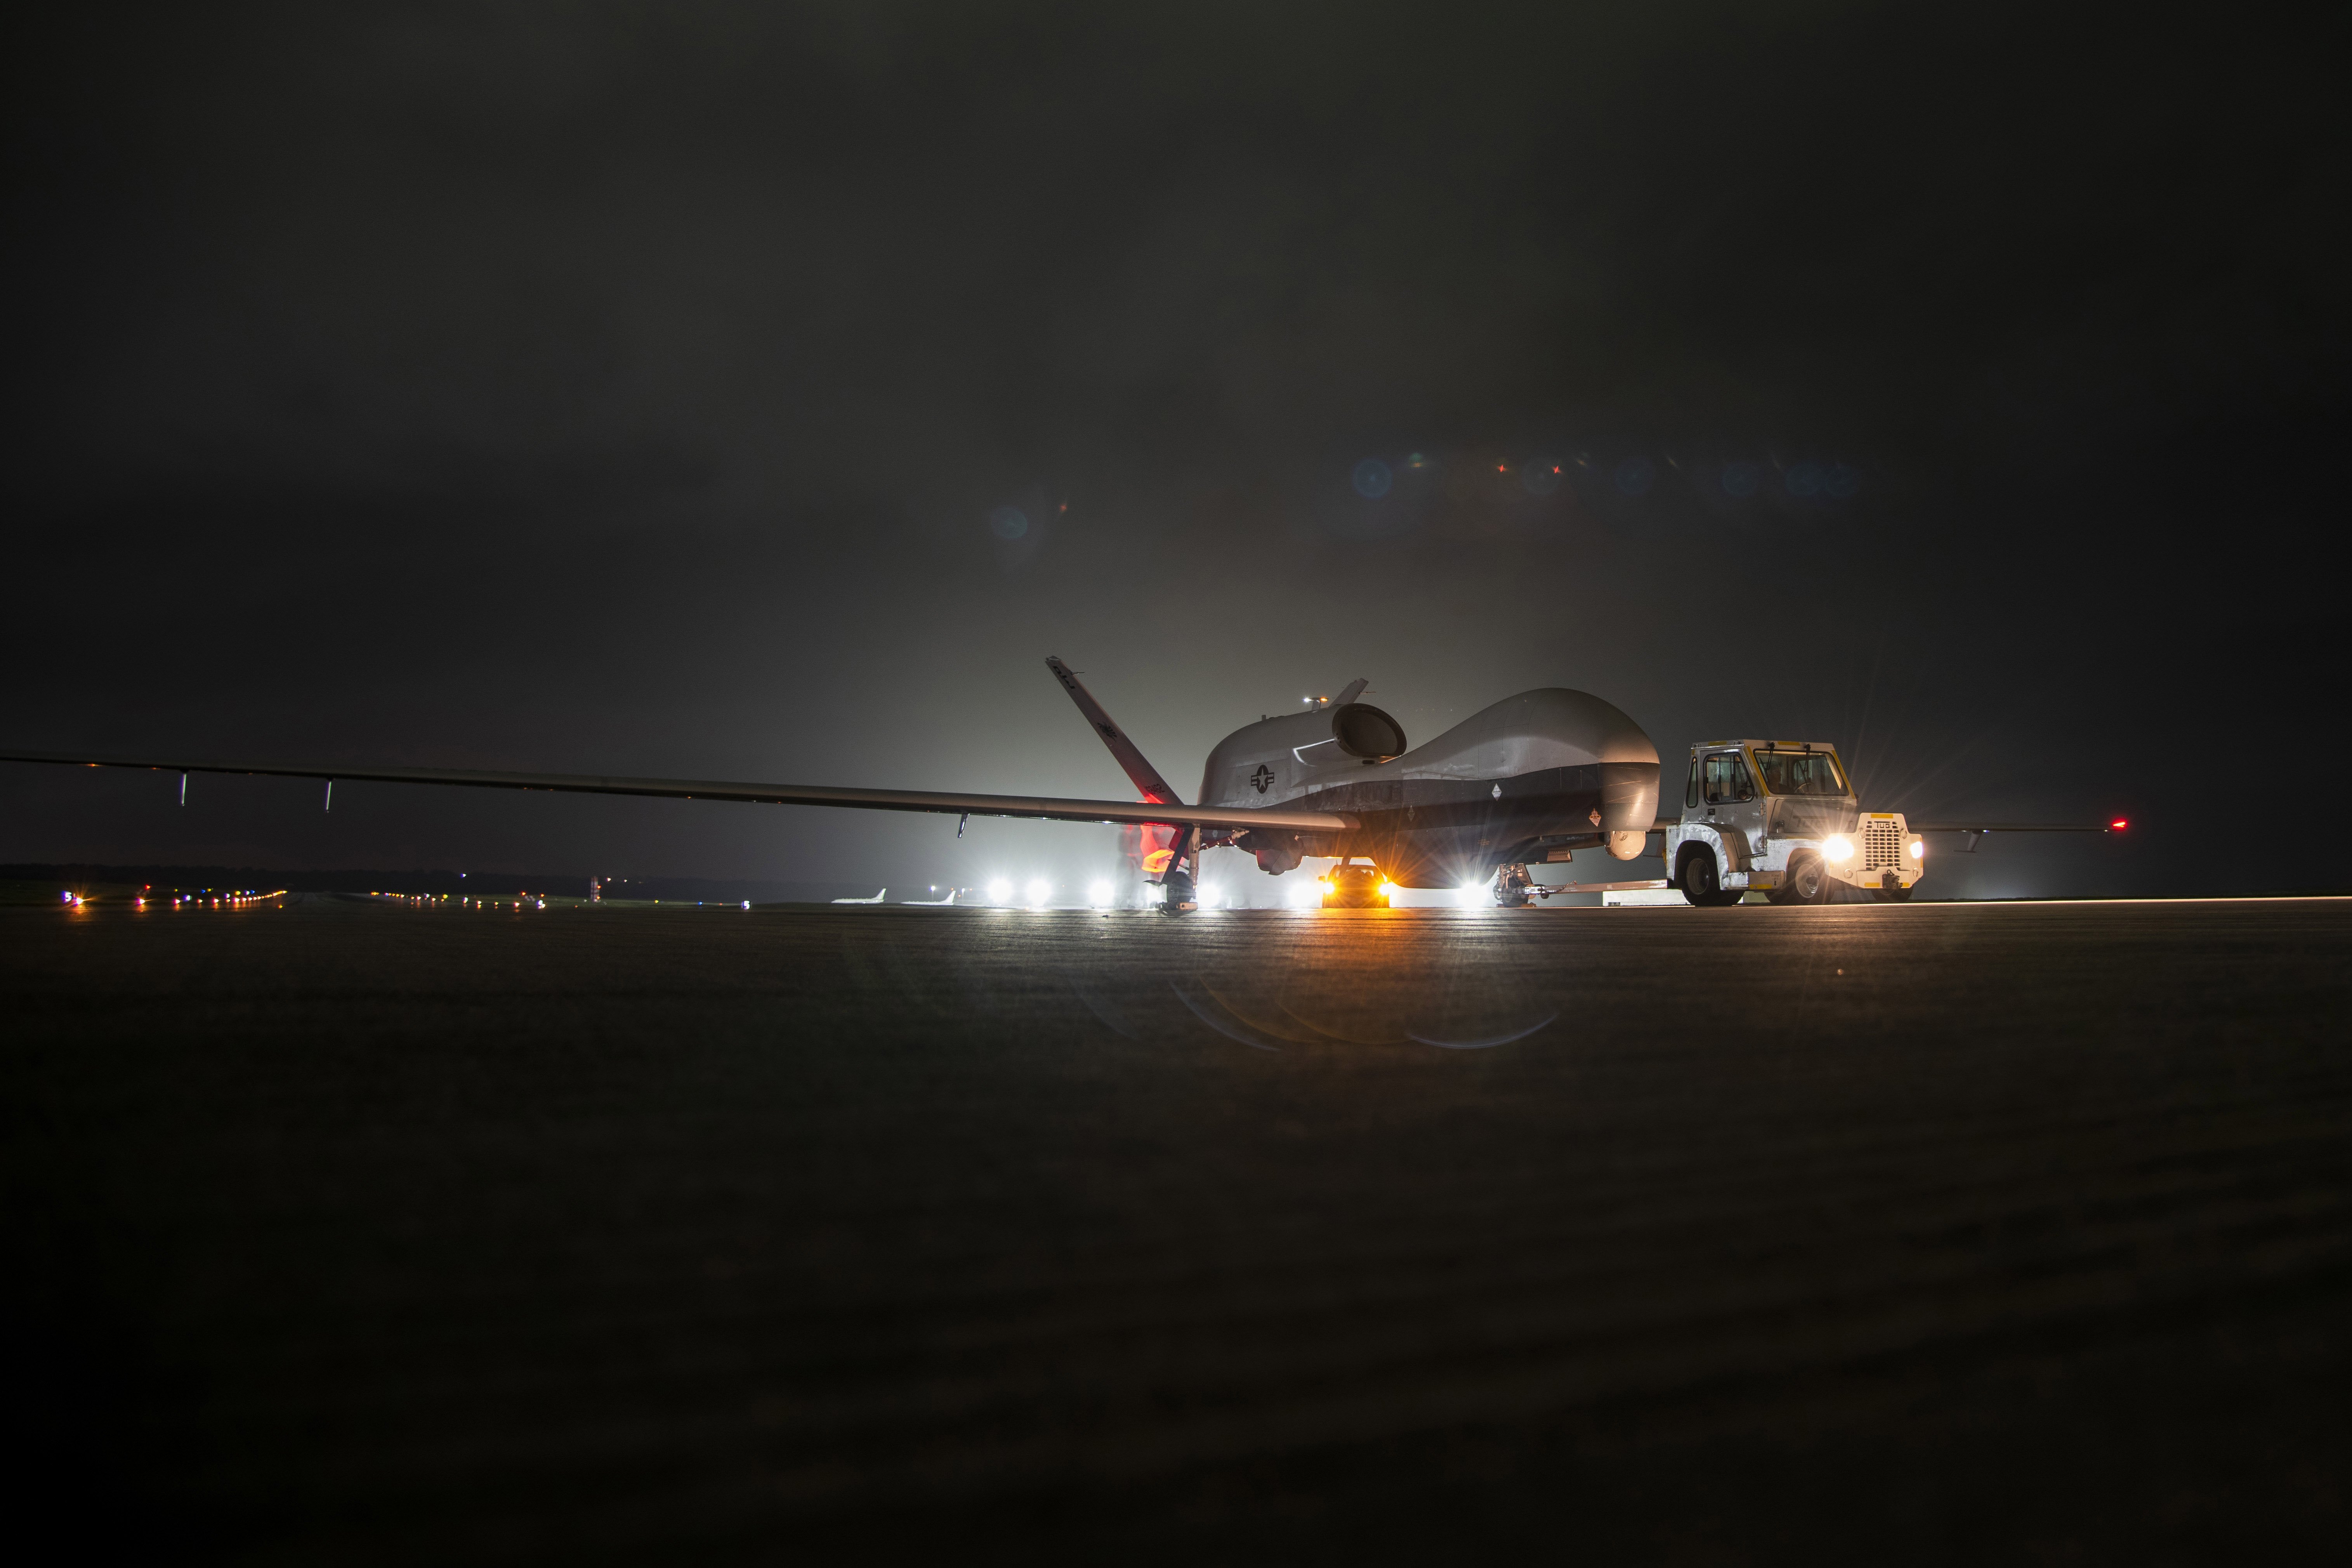 An MQ-4C Triton unmanned aircraft system (UAS) idles on a runway at Andersen Air Force Base, Guam after arriving for a deployment as part of an early operational capability (EOC) test. US Navy Photo